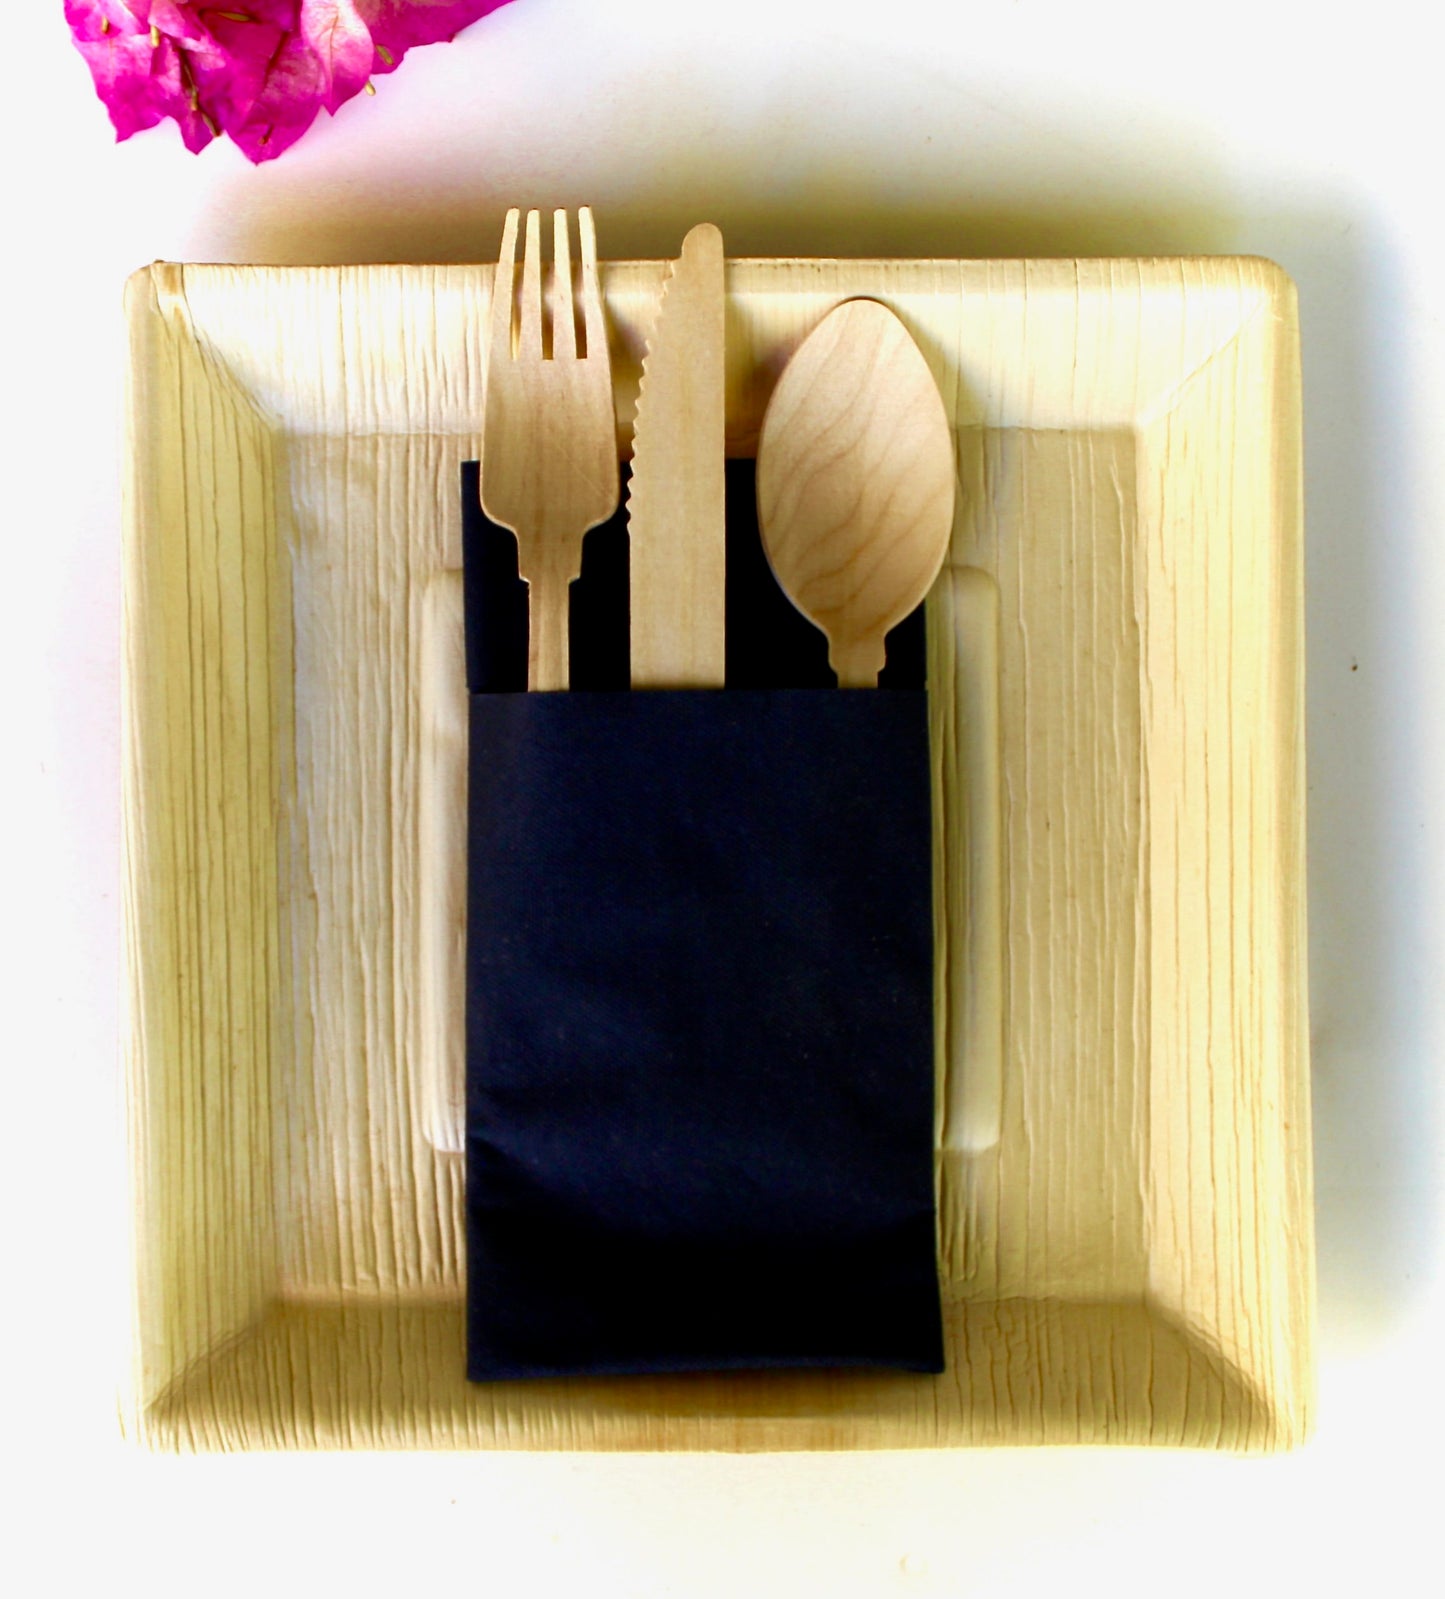 palm leaf plates 10 pice 10 " deep Square 10 pic Heart 6" - 50 pic napkin - 10 pic coup - 30 pic utensils   disposable and biodegrable - compostable